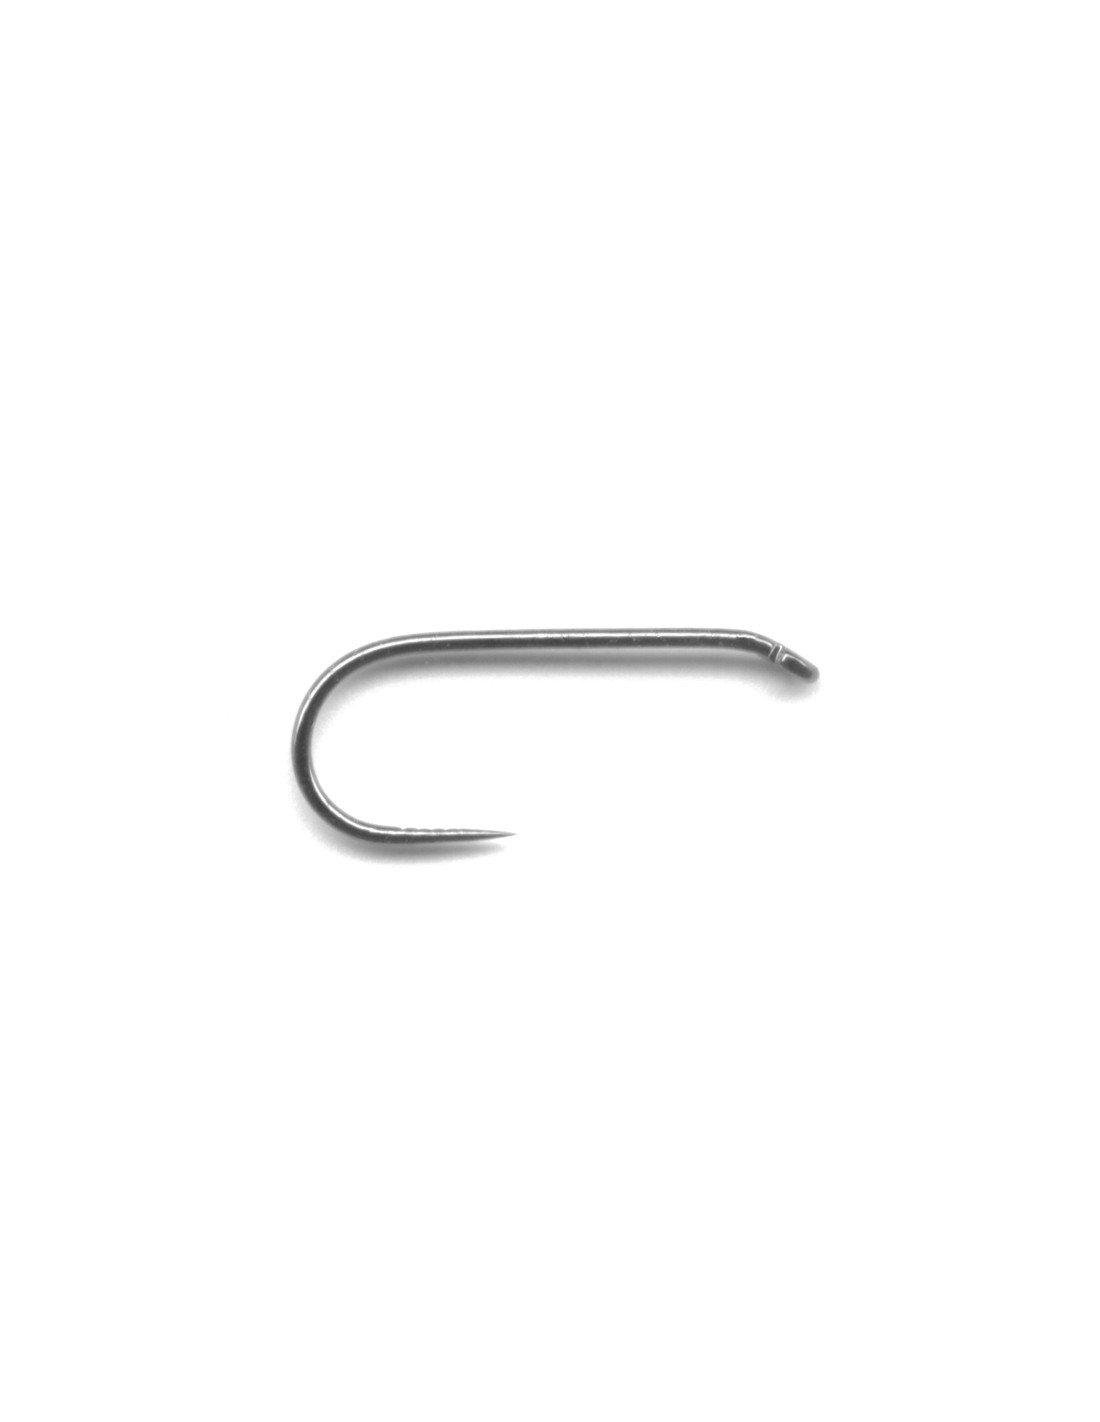 Maruto D23-SSC Barbless Dry Fly Hook - Competitive Angler